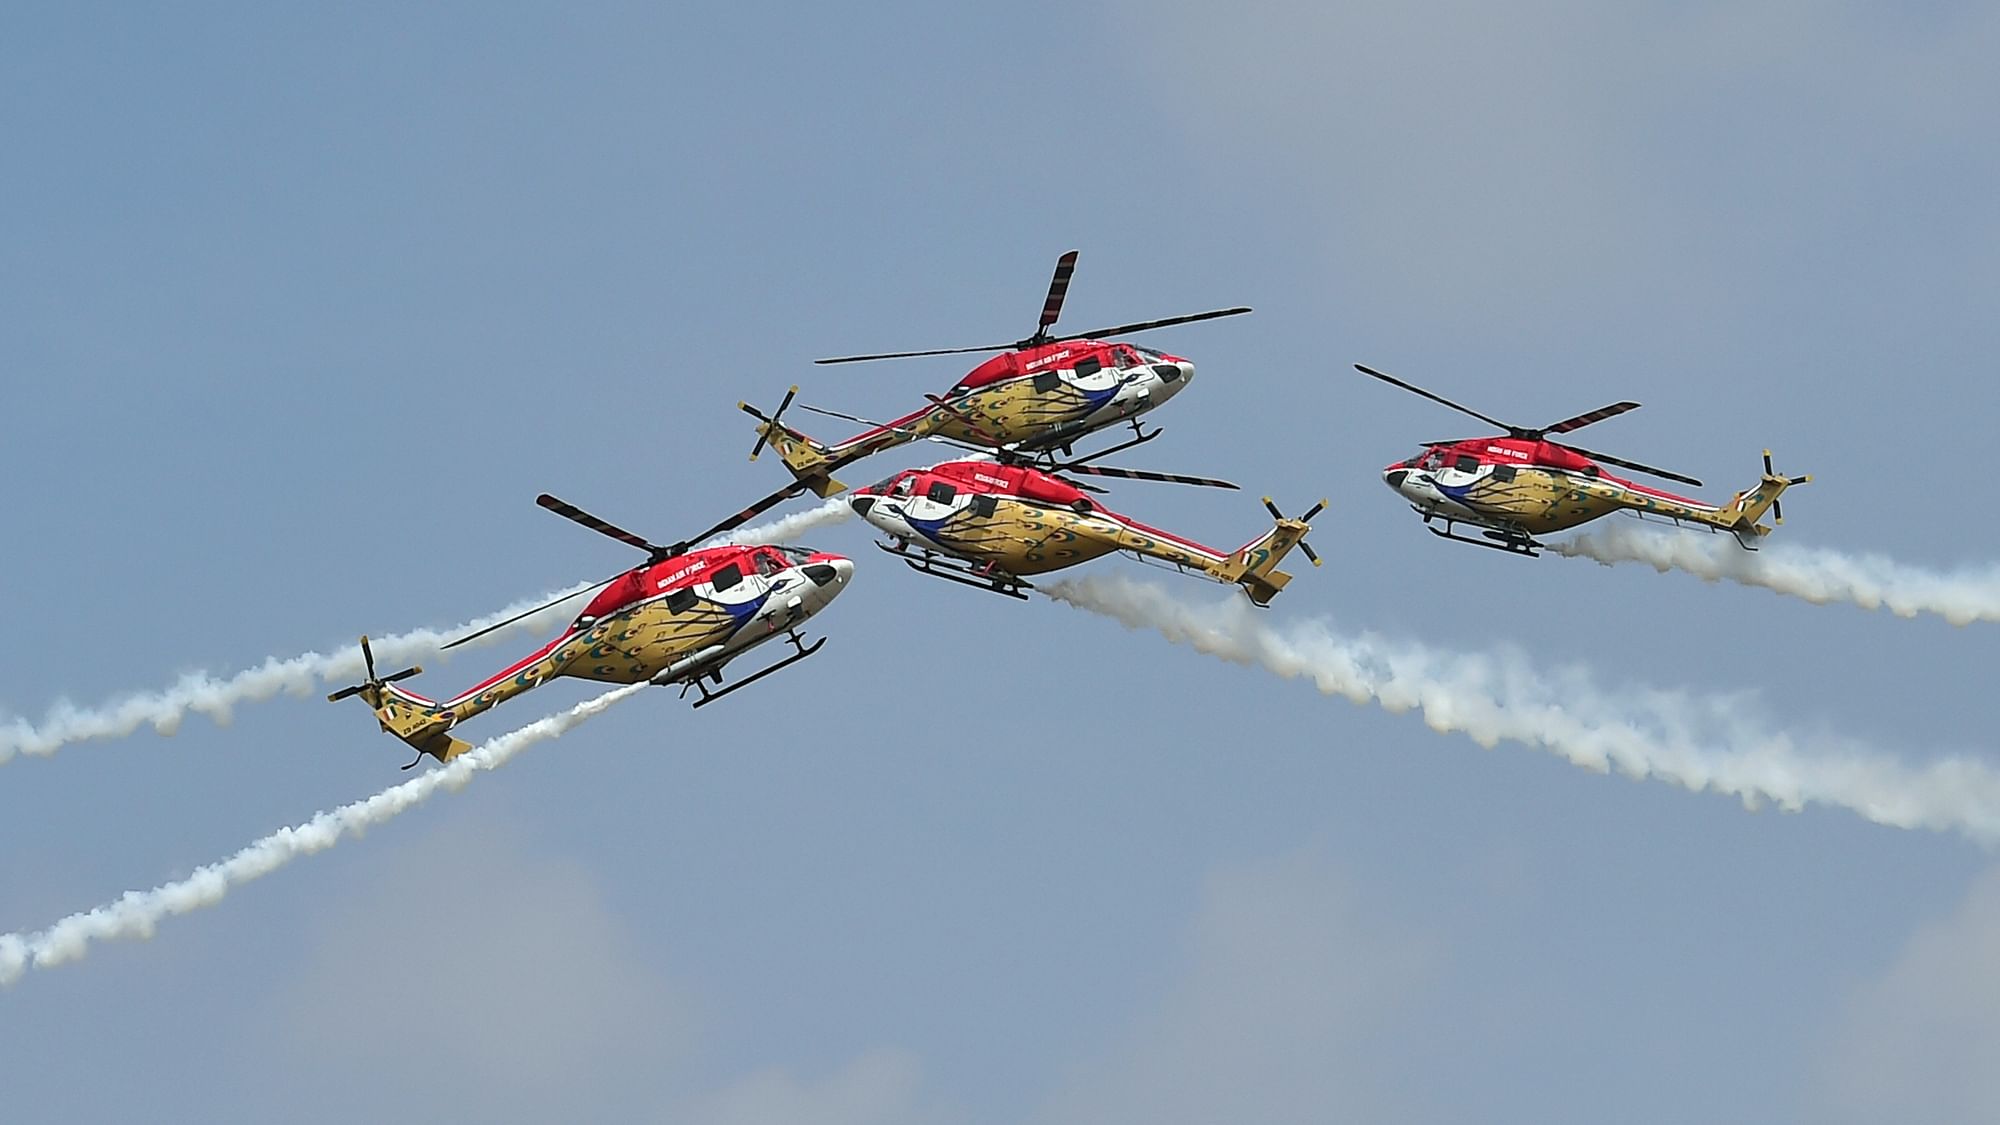 Indian Air Force’s aerobatic team ‘Sarang’ performs during the inauguration of the 13th edition of Aero India, at Yelahanka air base in Bengaluru, Wednesday, 3 February, 2021.